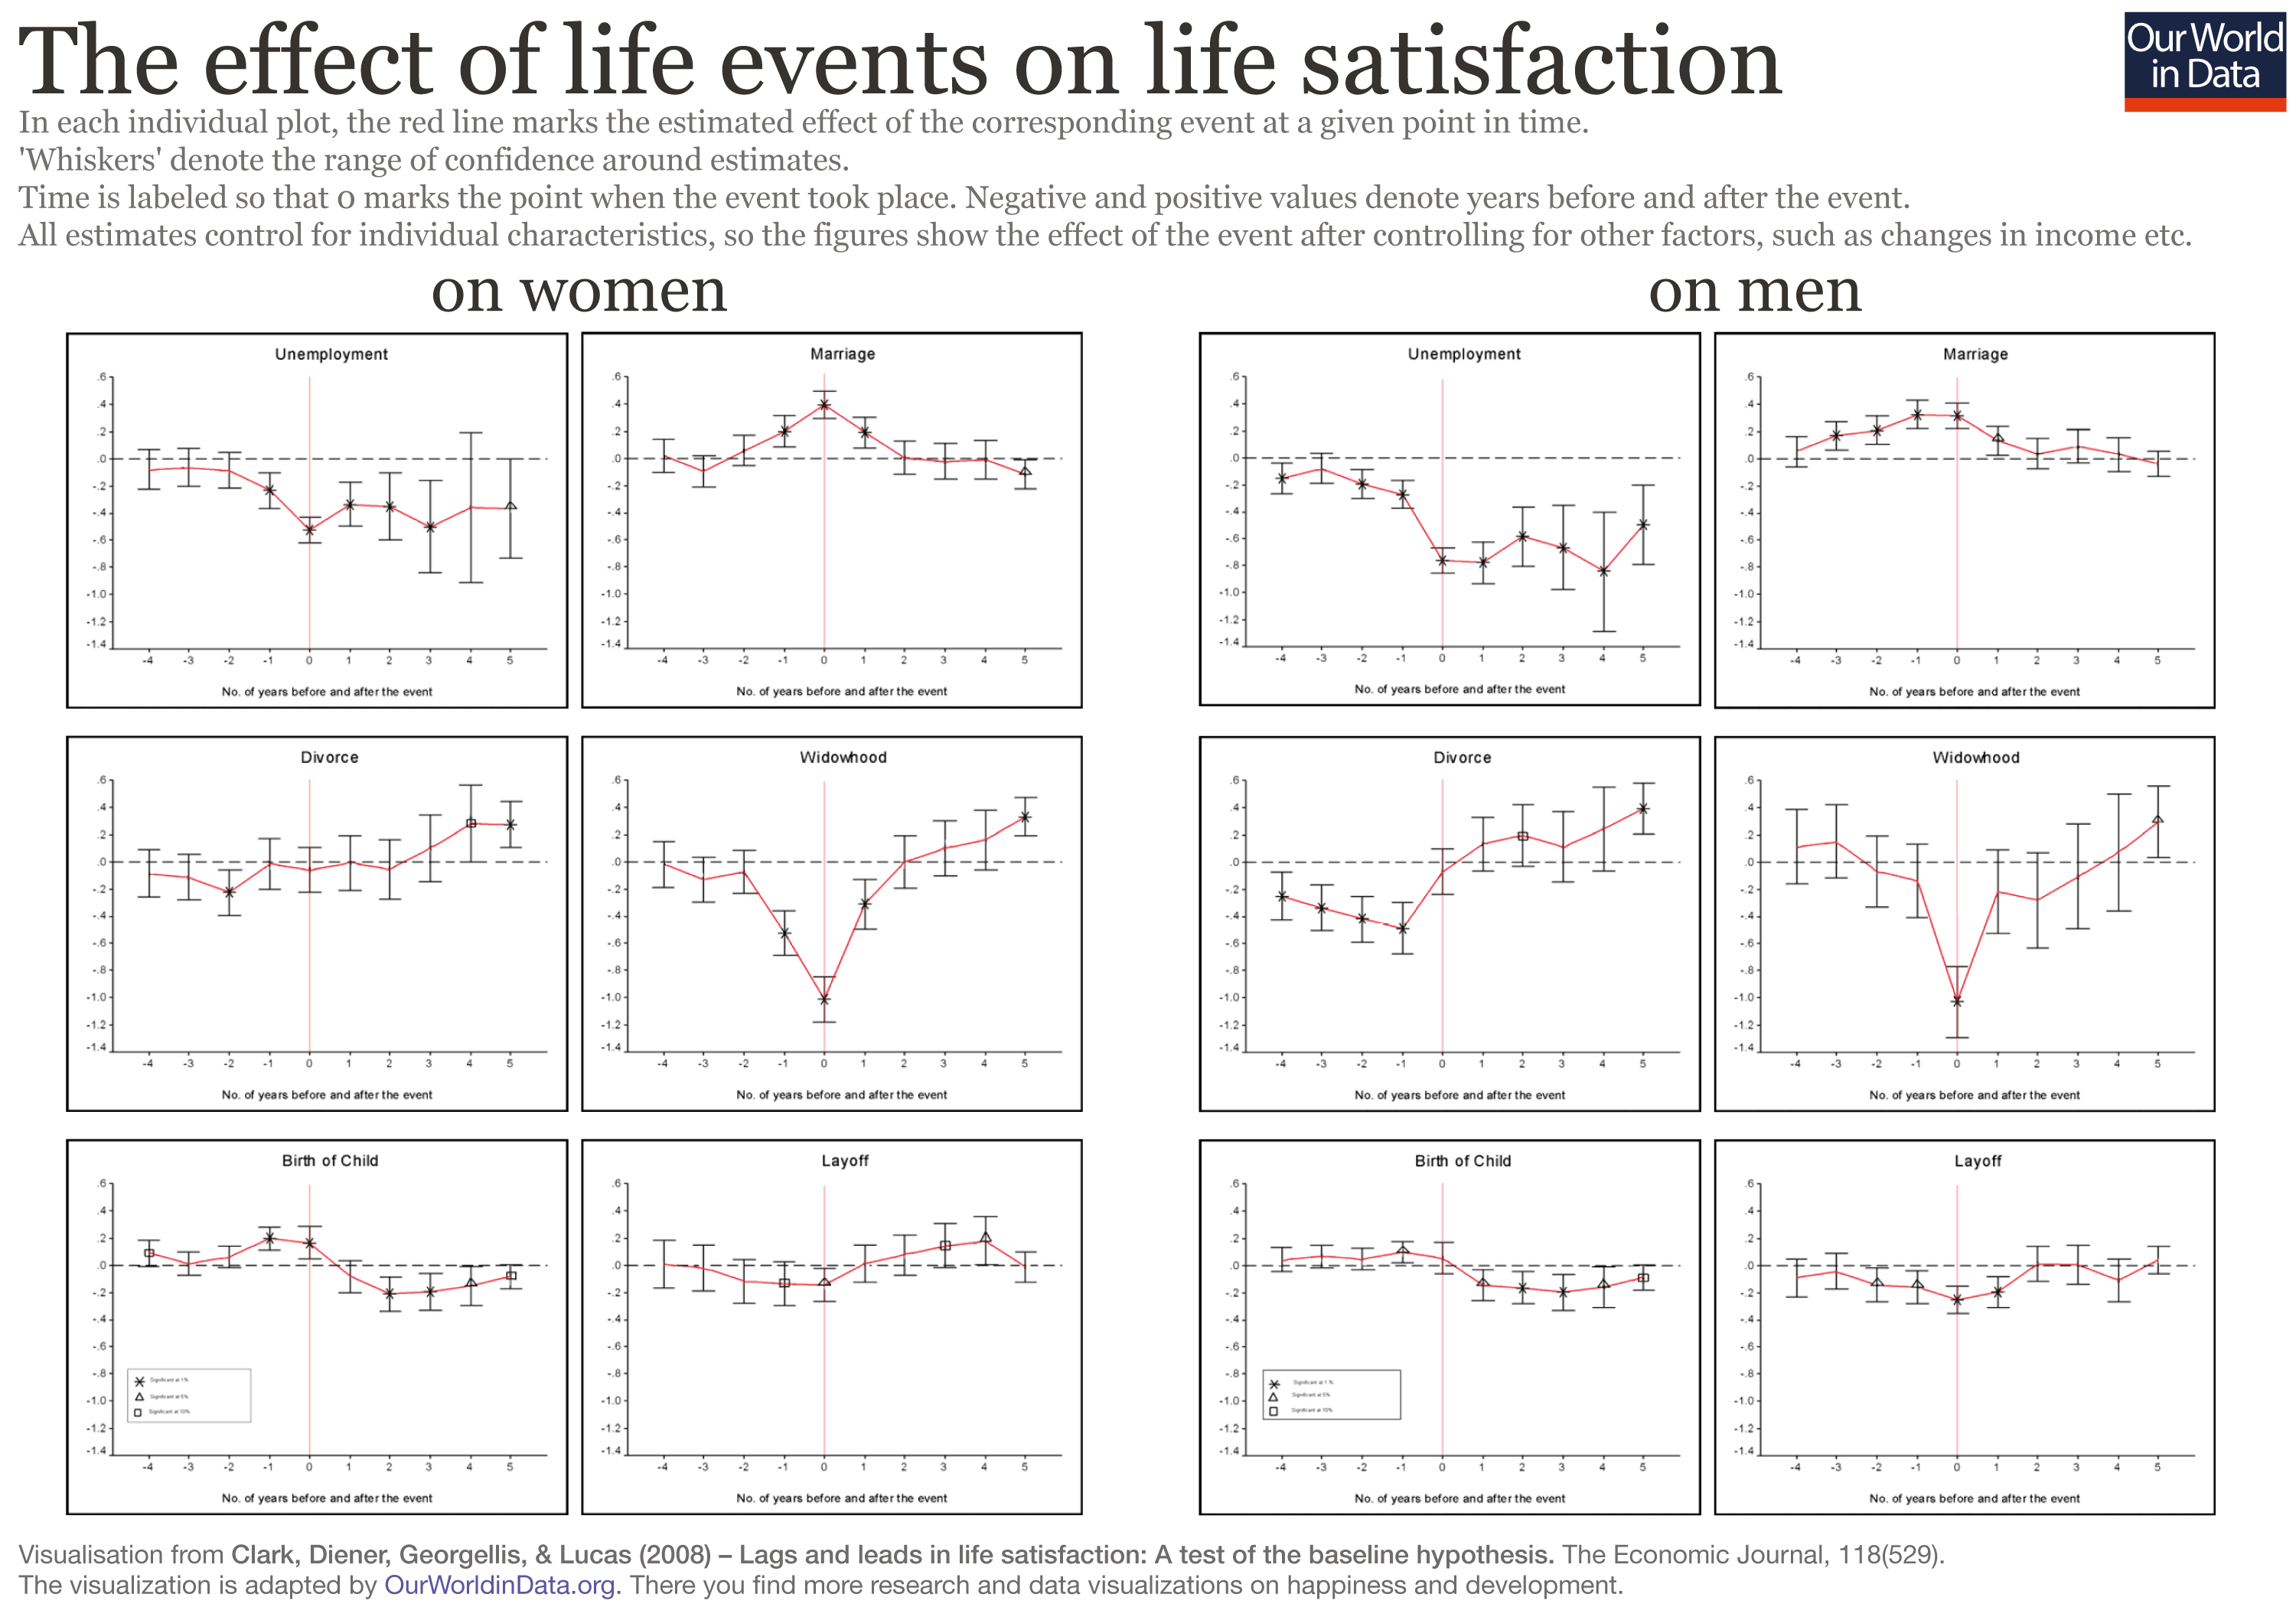 Graphs showing the effect of life events on happiness